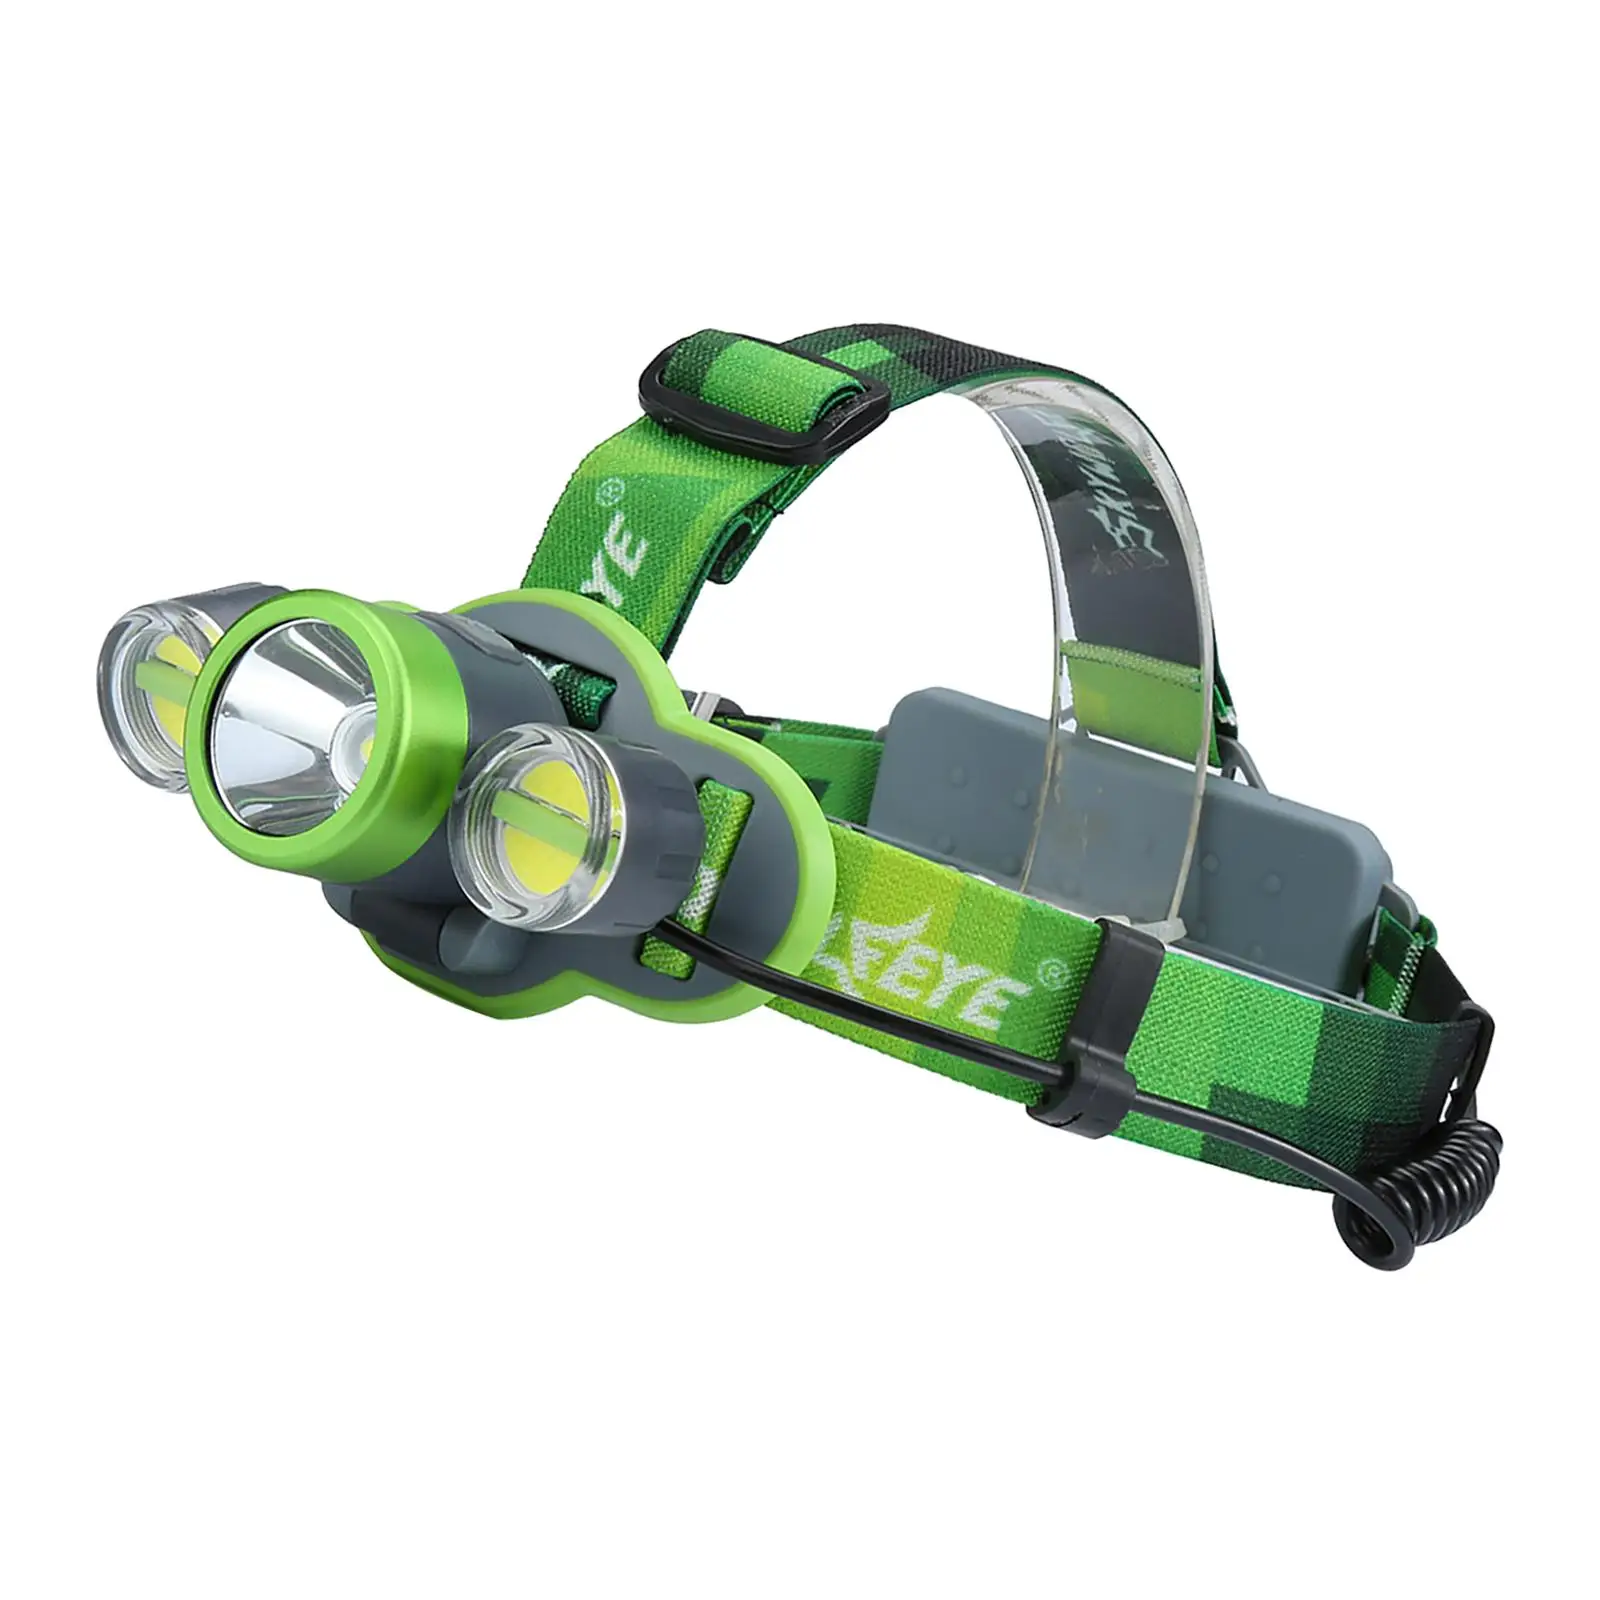 COB LED Headlamp Head Lamp Rechargeable Waterproof Headtorch 5 Modes flashlights for Riding Working Camping Hunting Outdoor